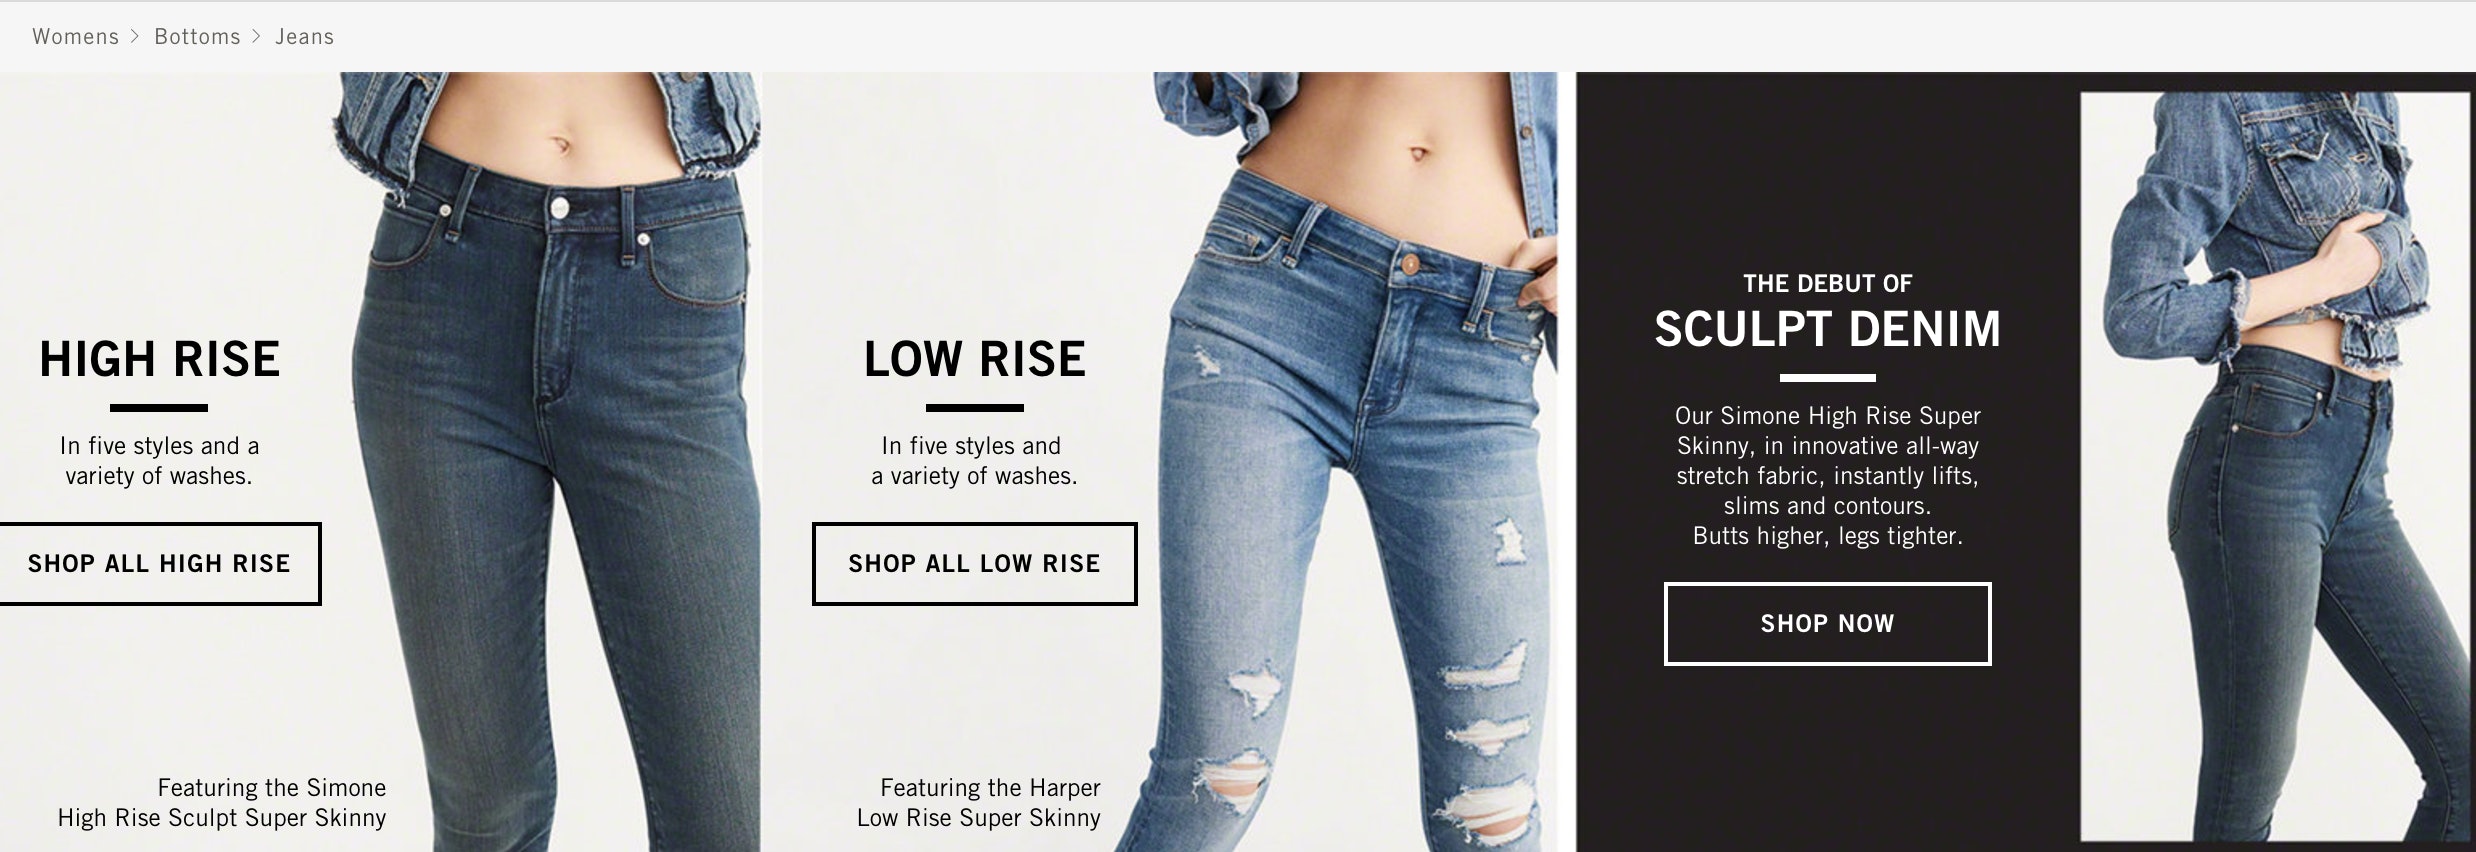 abercrombie fitch low rise jeans